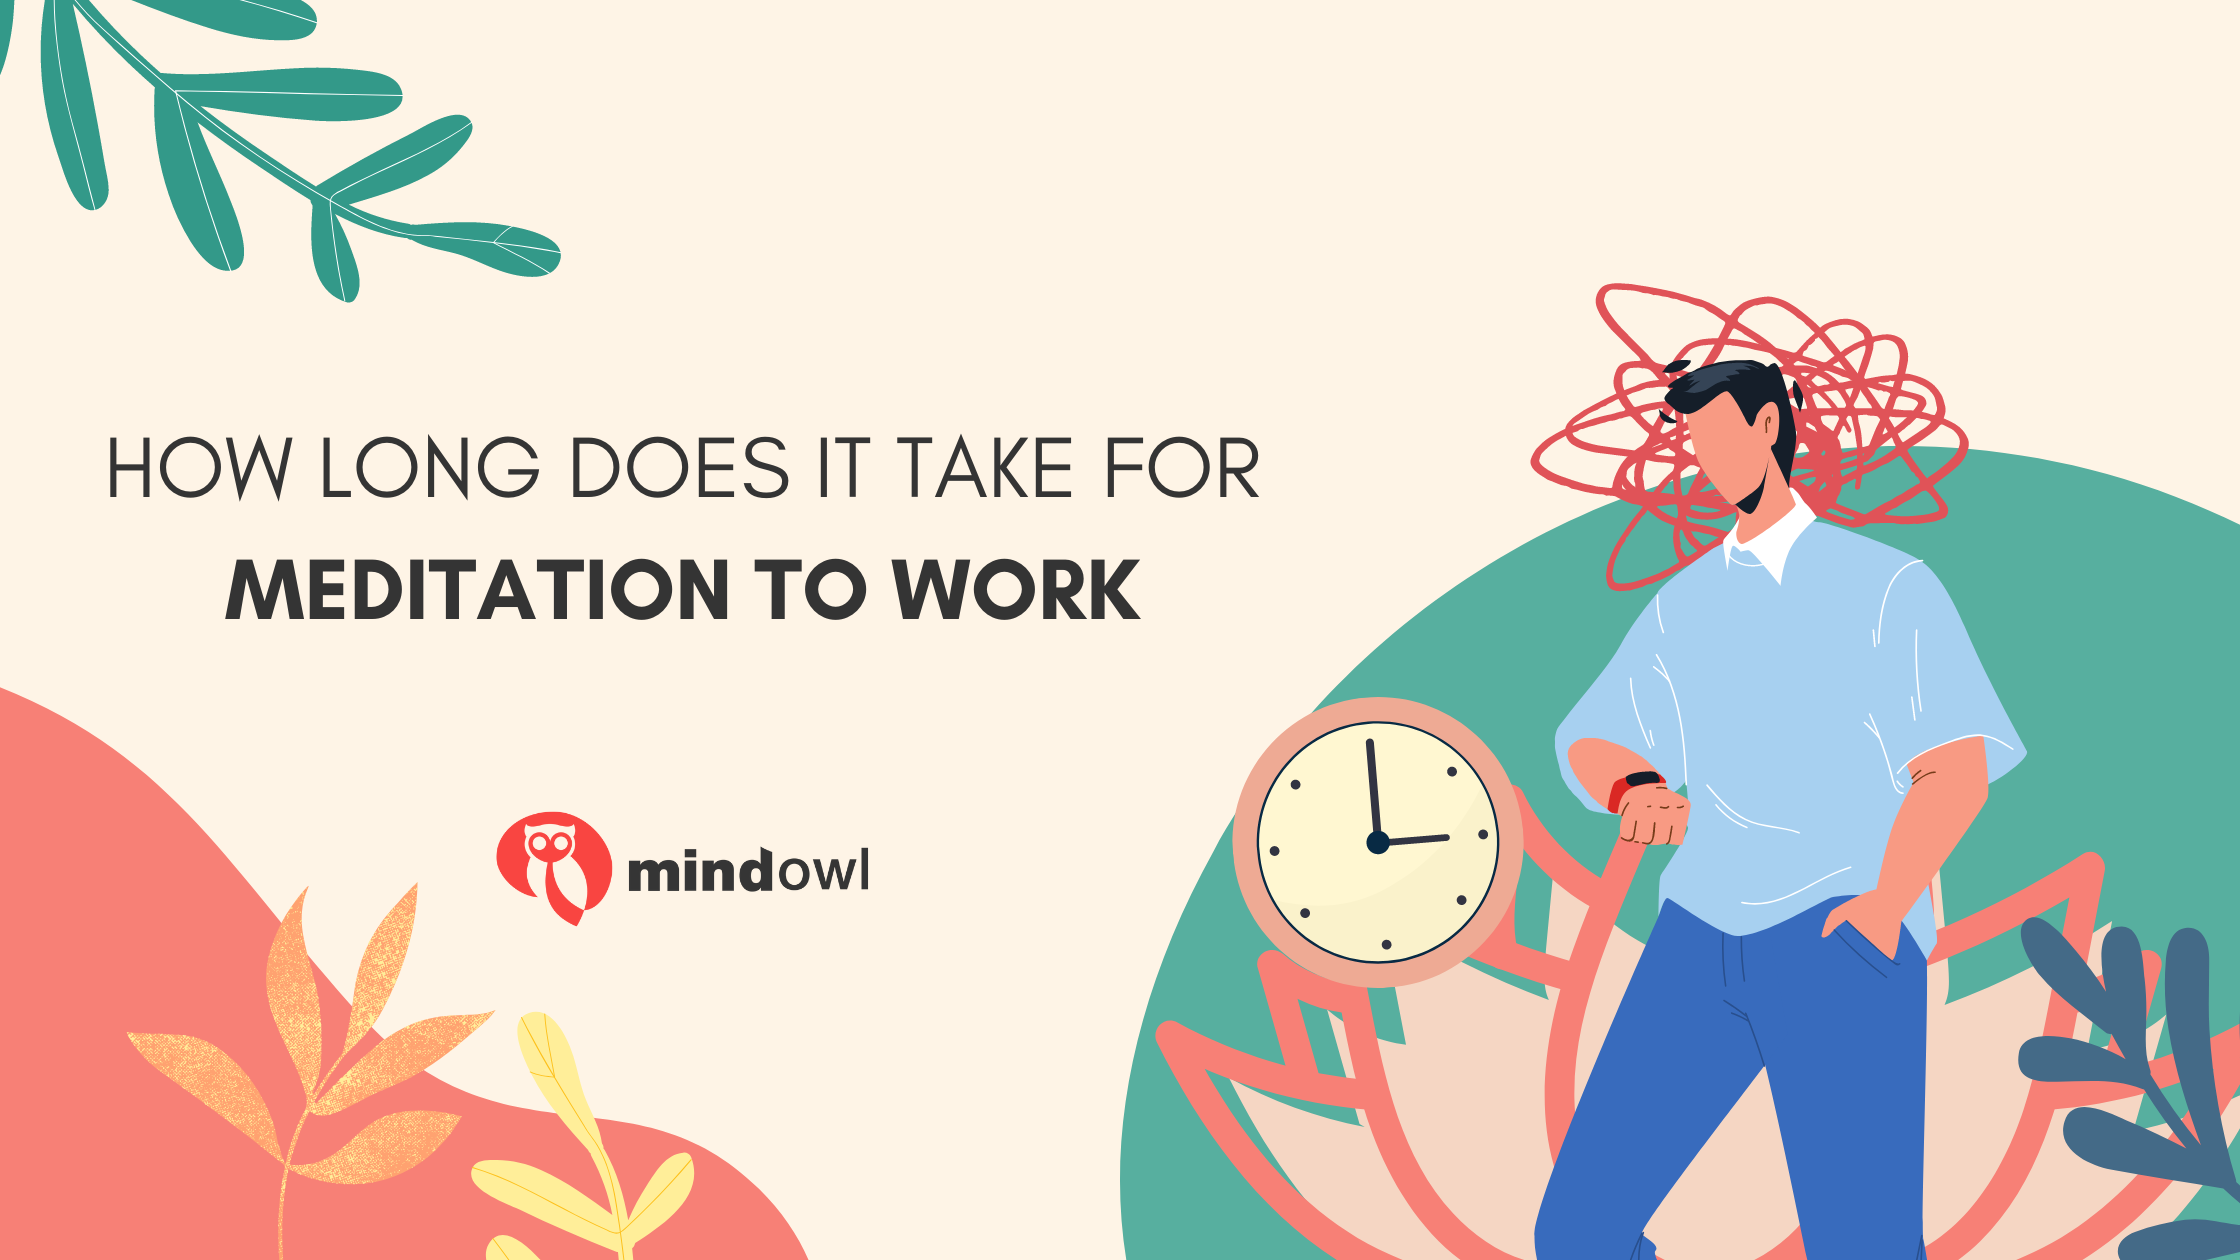 How long does it take for meditation to work